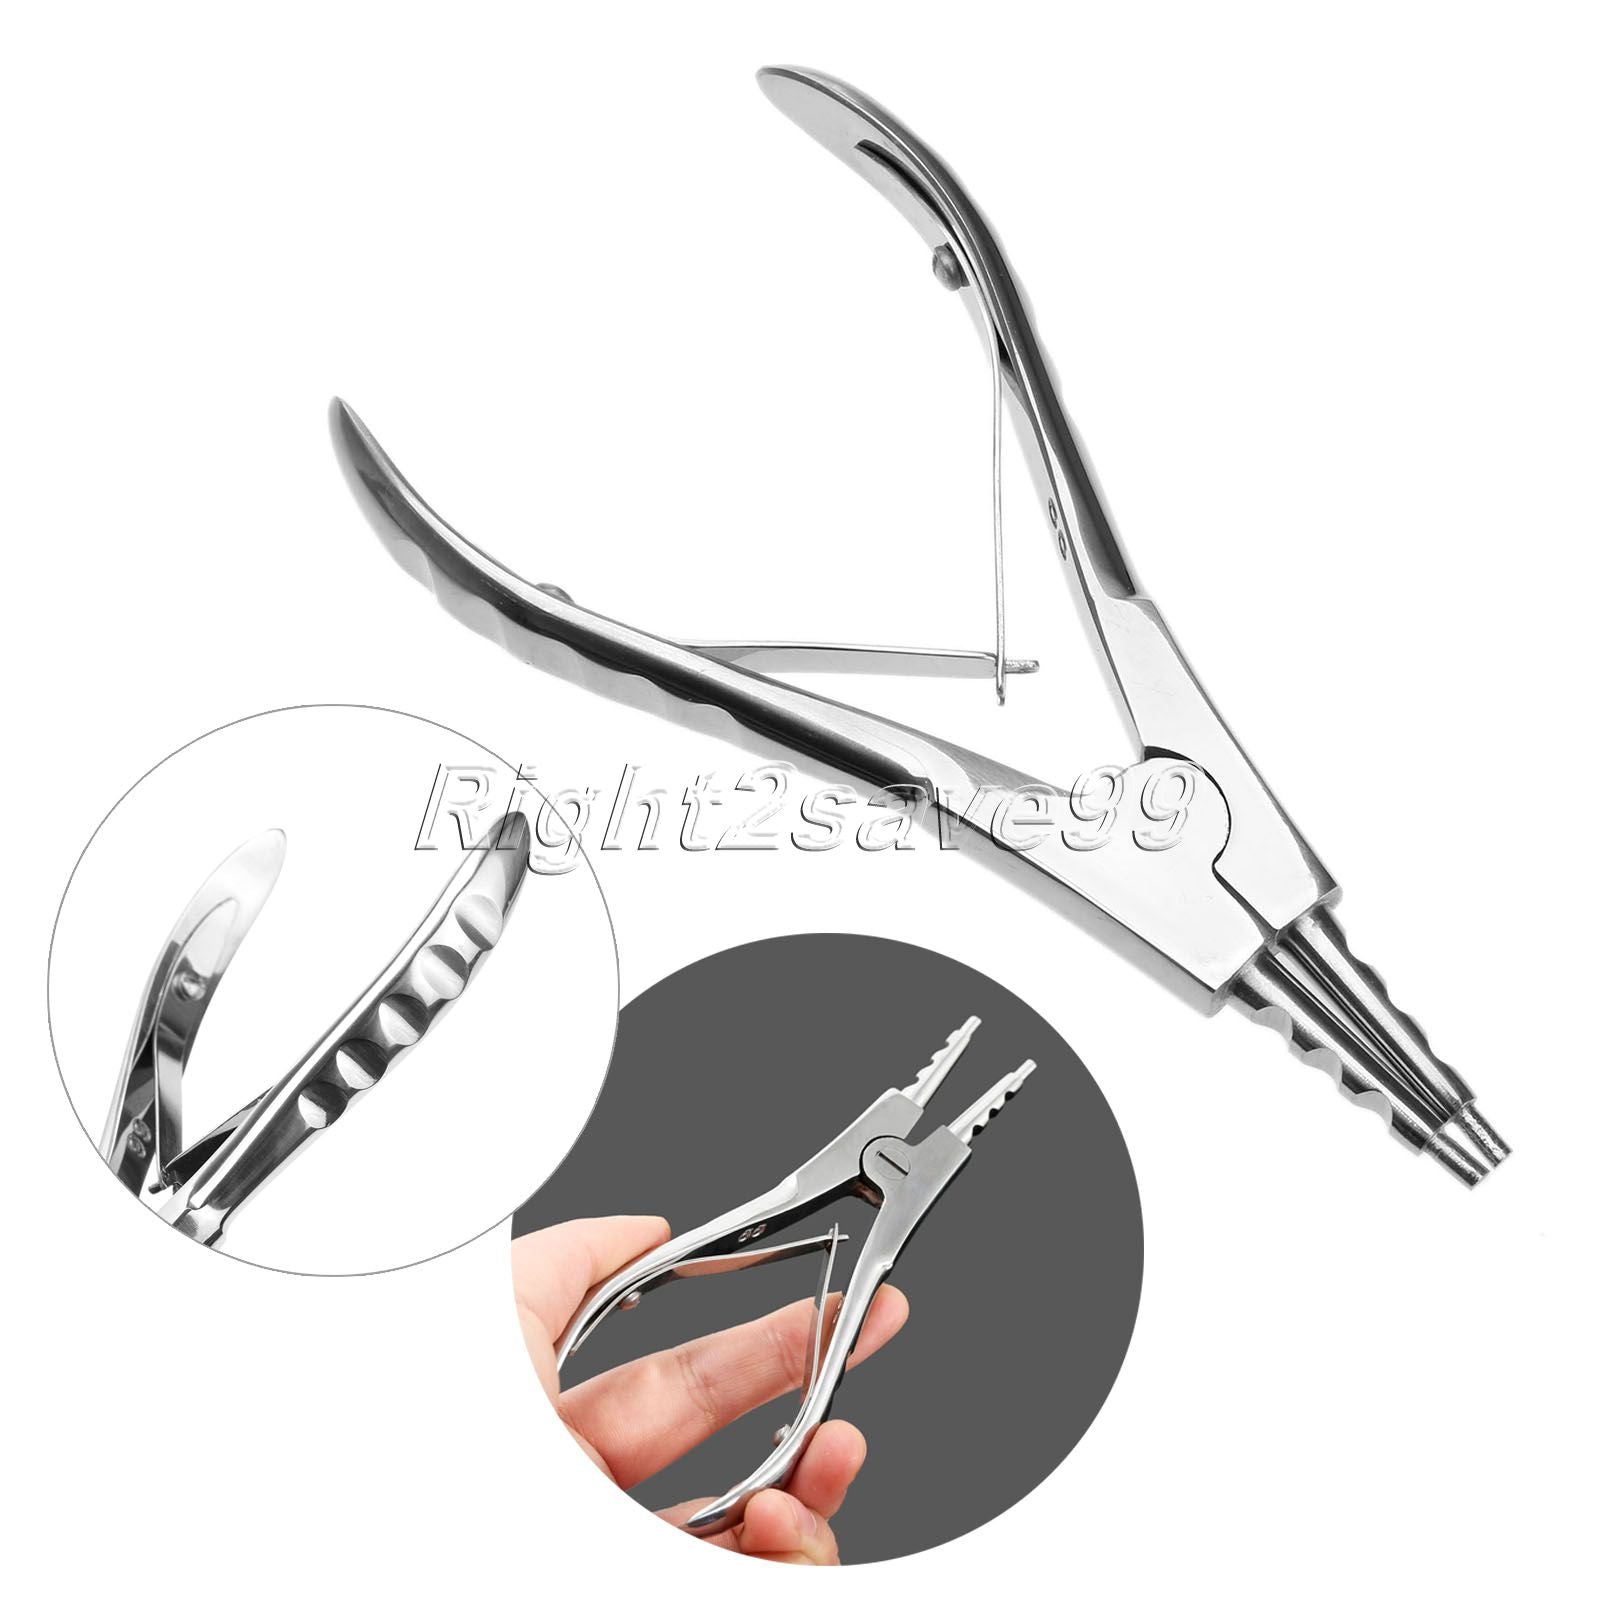 Ear Nose Lip Navel Tongue Septum Forcep Clamp Pliers Tool Surgical Ste